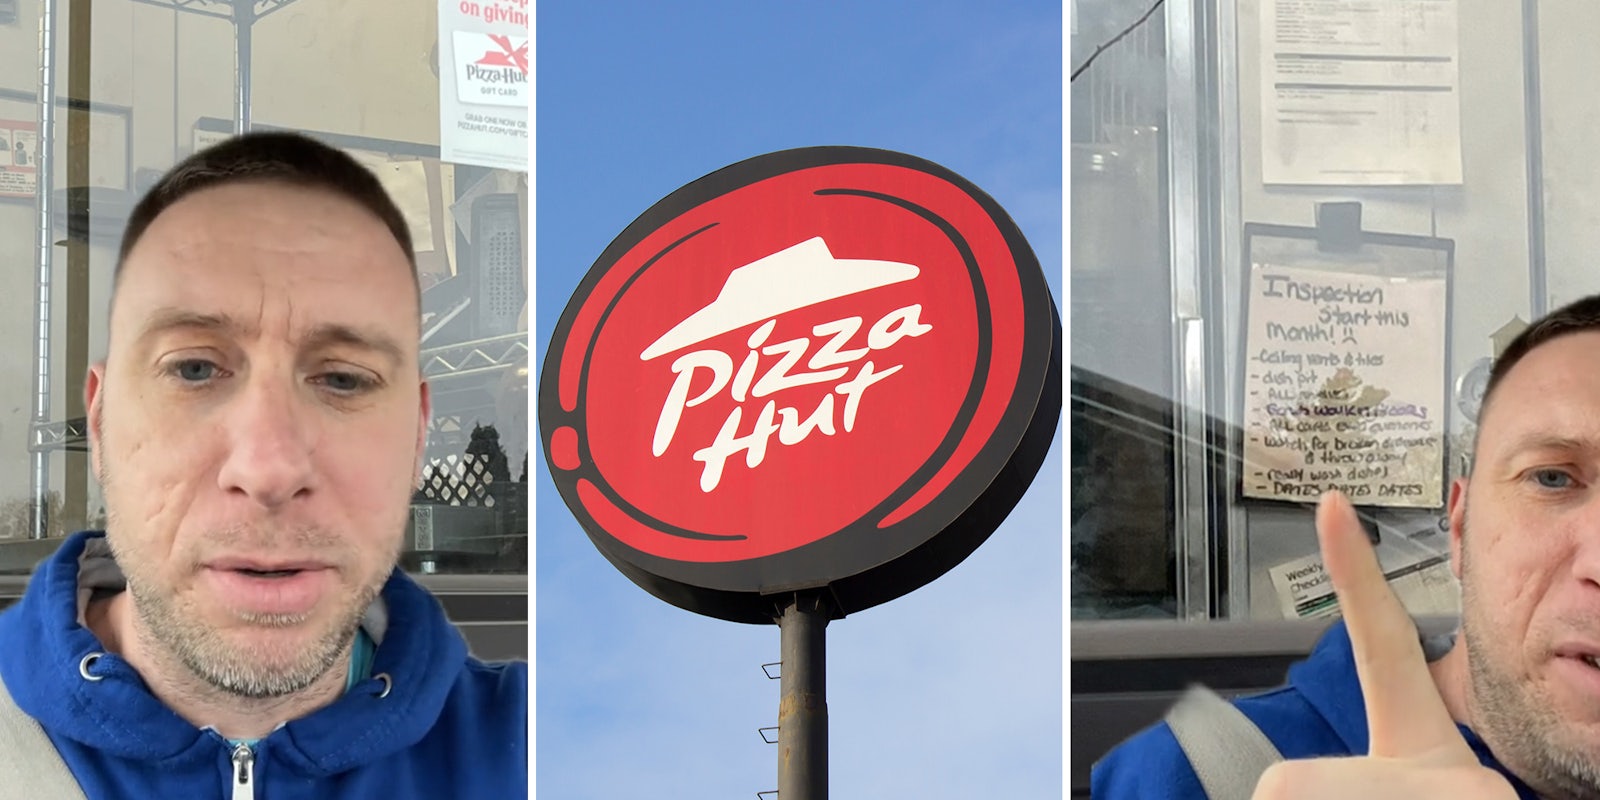 Man catches Pizza Hut urging workers to ‘upsell’ wings, desserts, and soda to customers